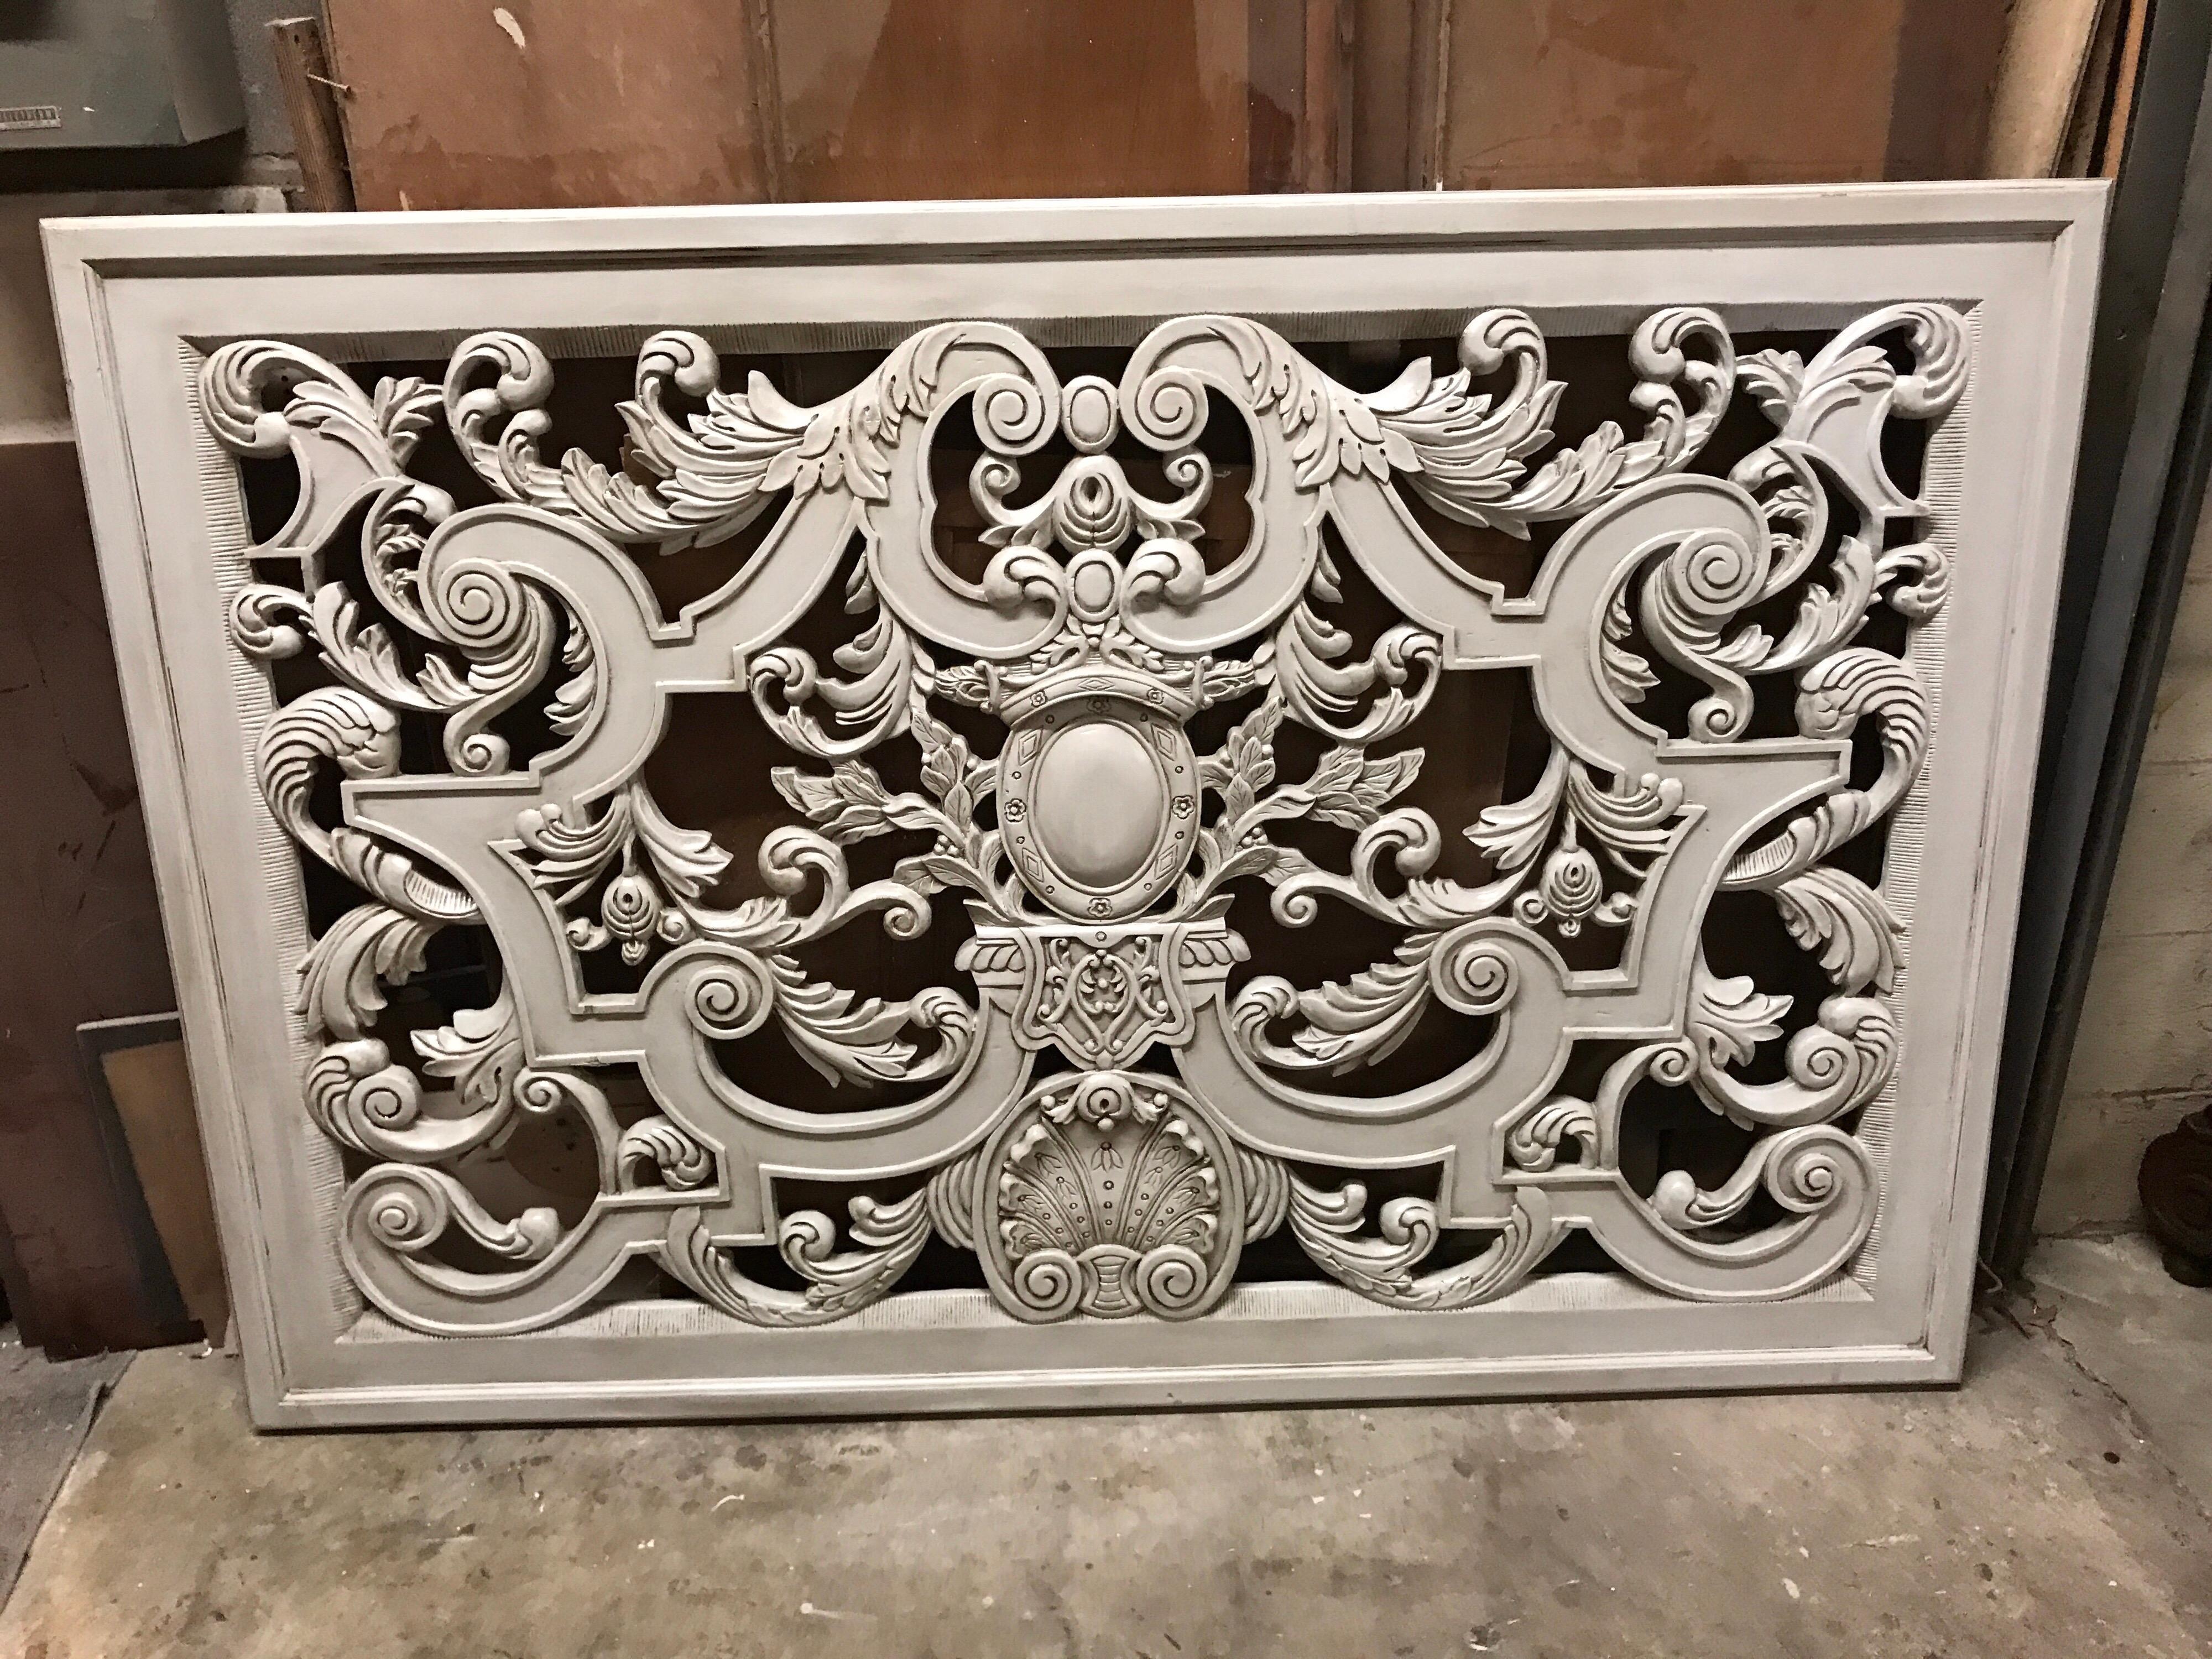 Neoclassic Swedish gray painted carved wood architectural panel, beautifully carved with a center medallion and shell. Weighs about 75 pounds.